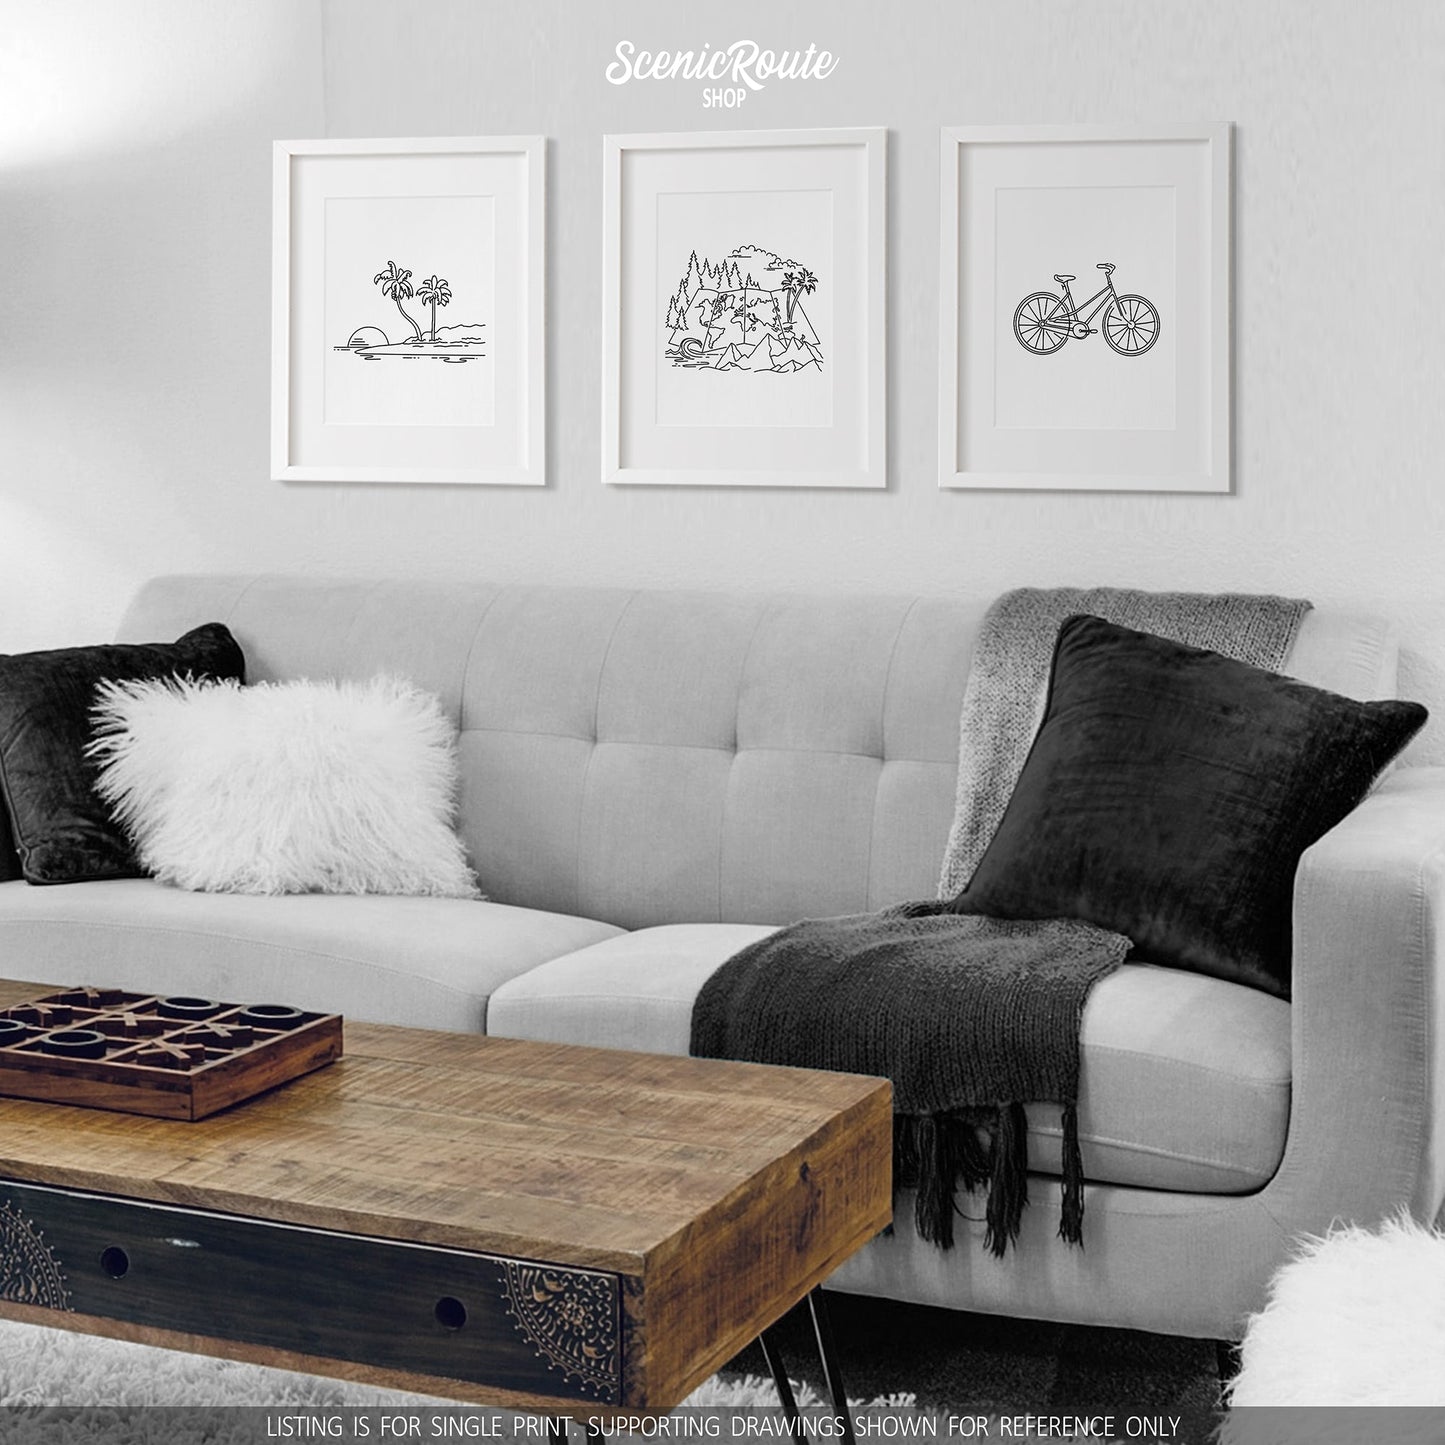 A group of three framed drawings on a wall hanging above a couch with pillows and a blanket. The line art drawings include an Island, the Adventure Map Drawing, and a Bicycle